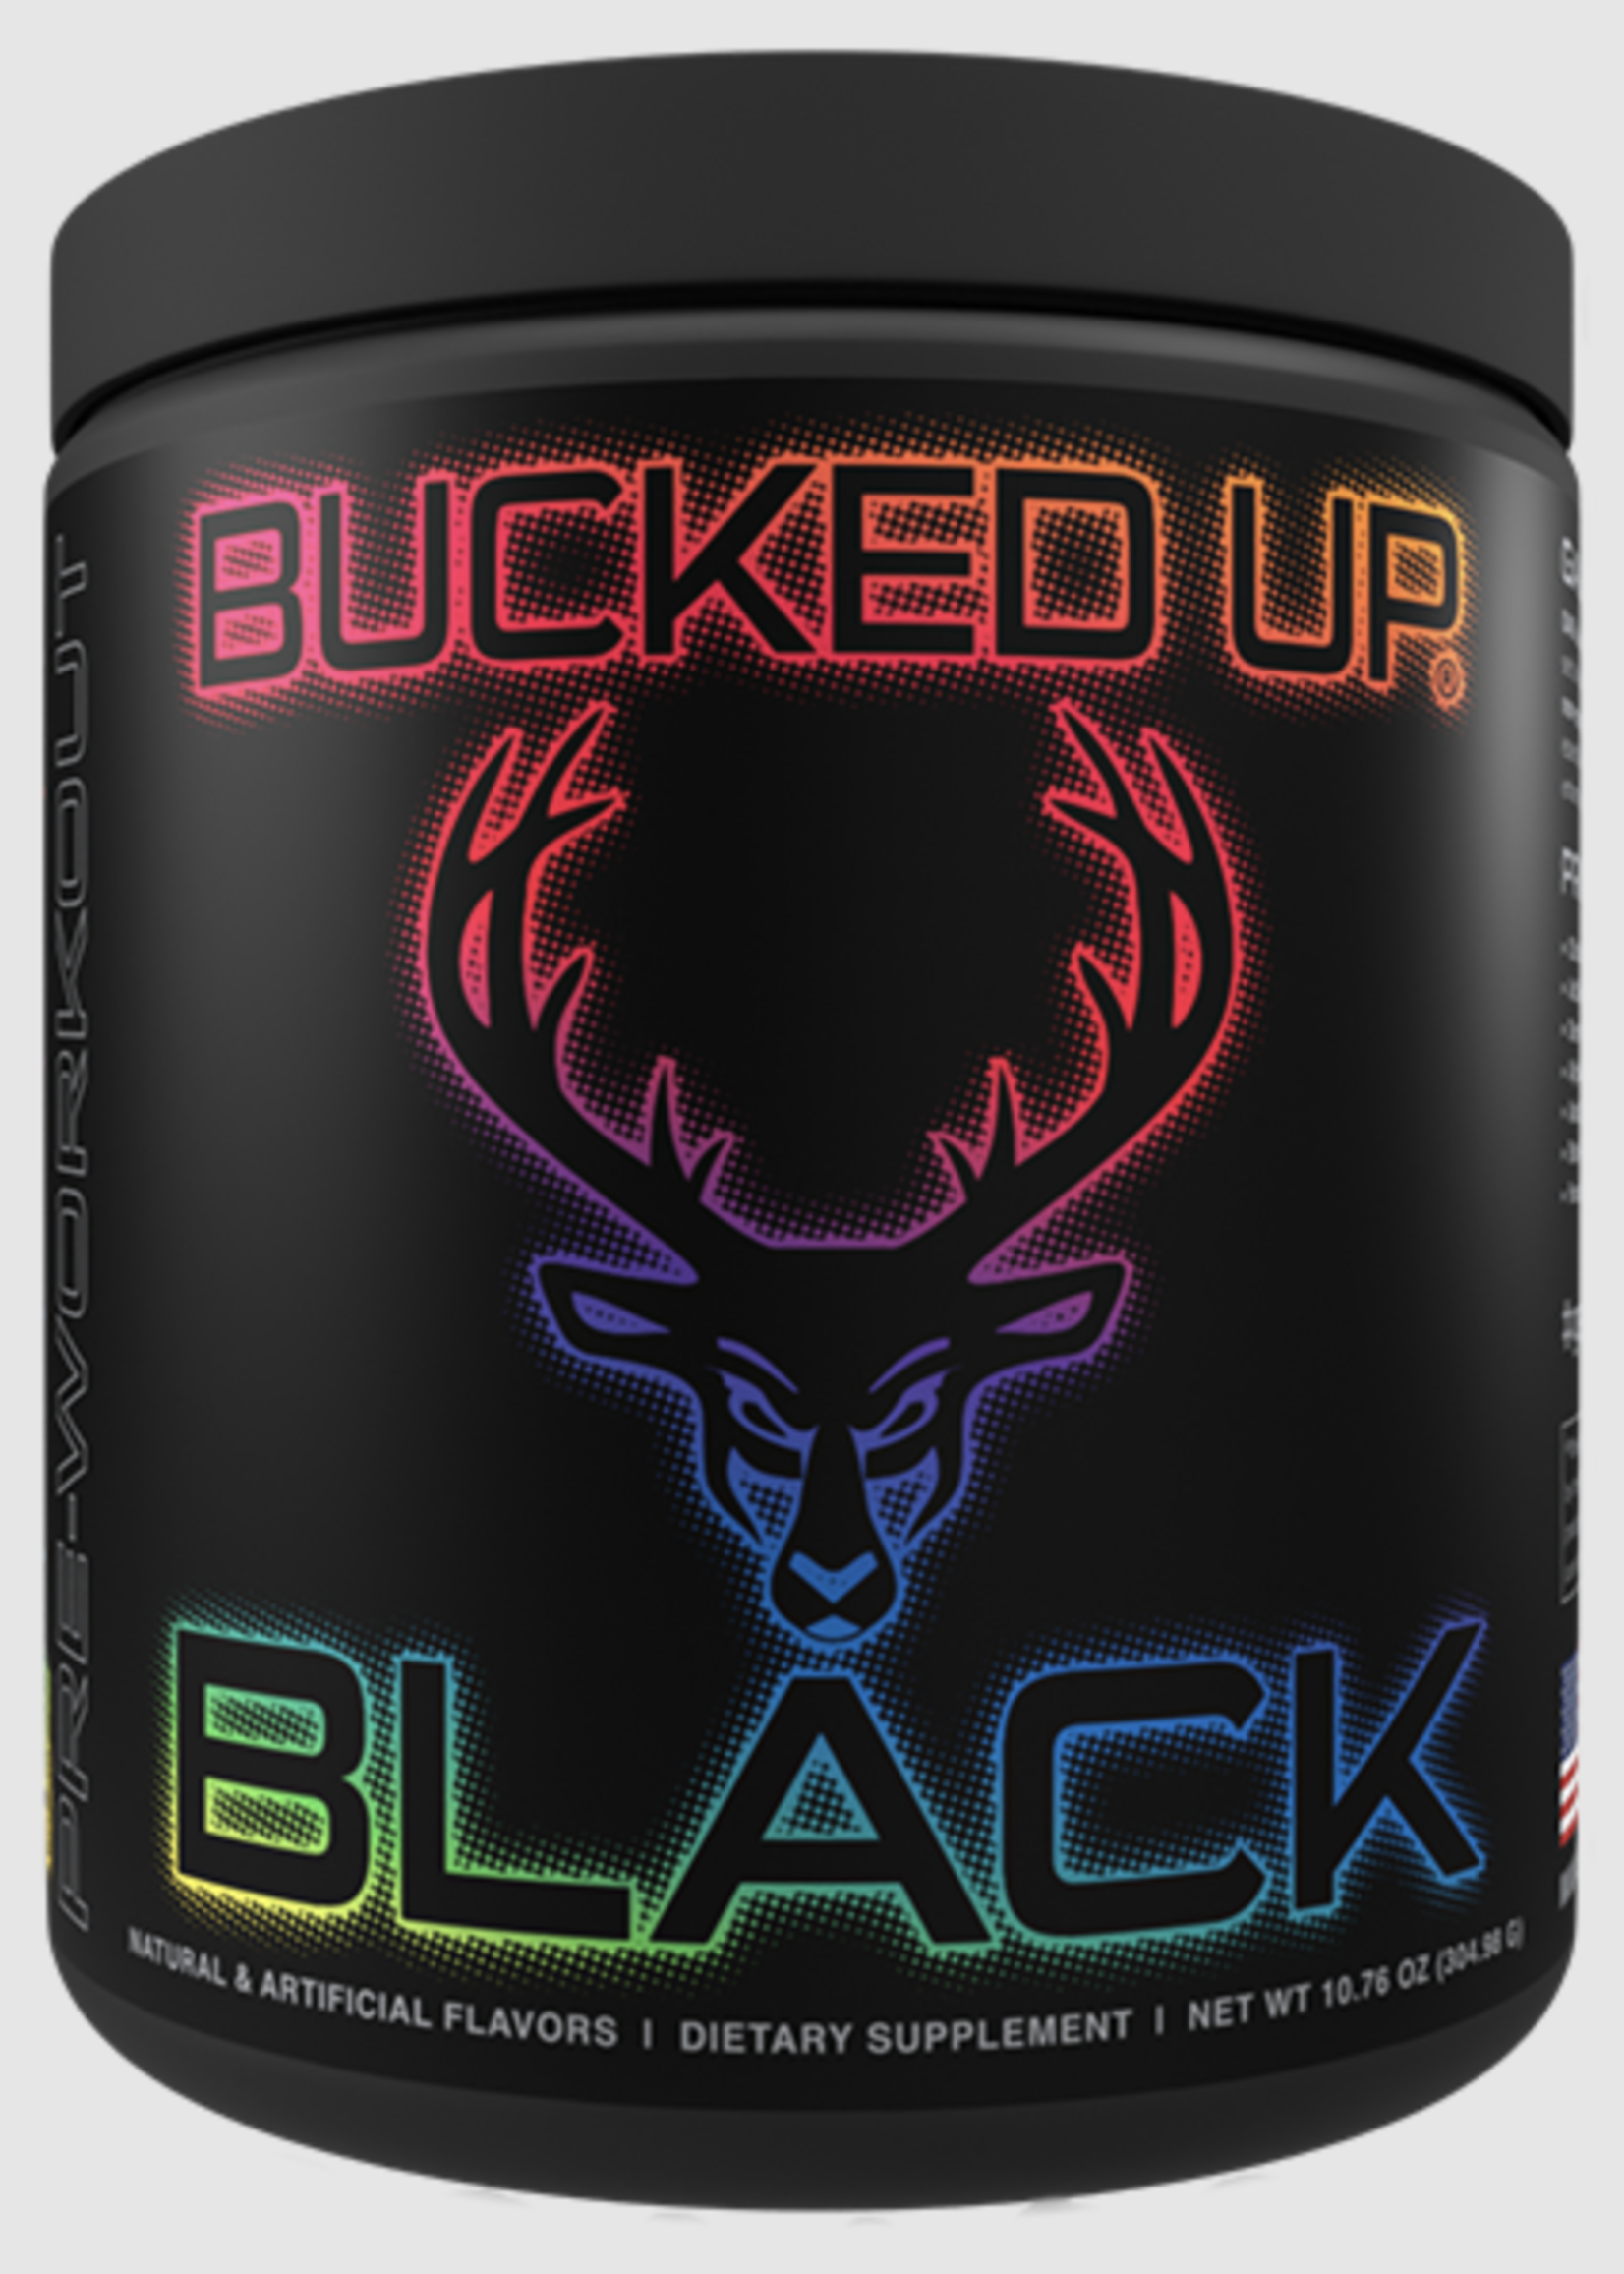 Bucked Up Bucked Up Black Pre-Workout